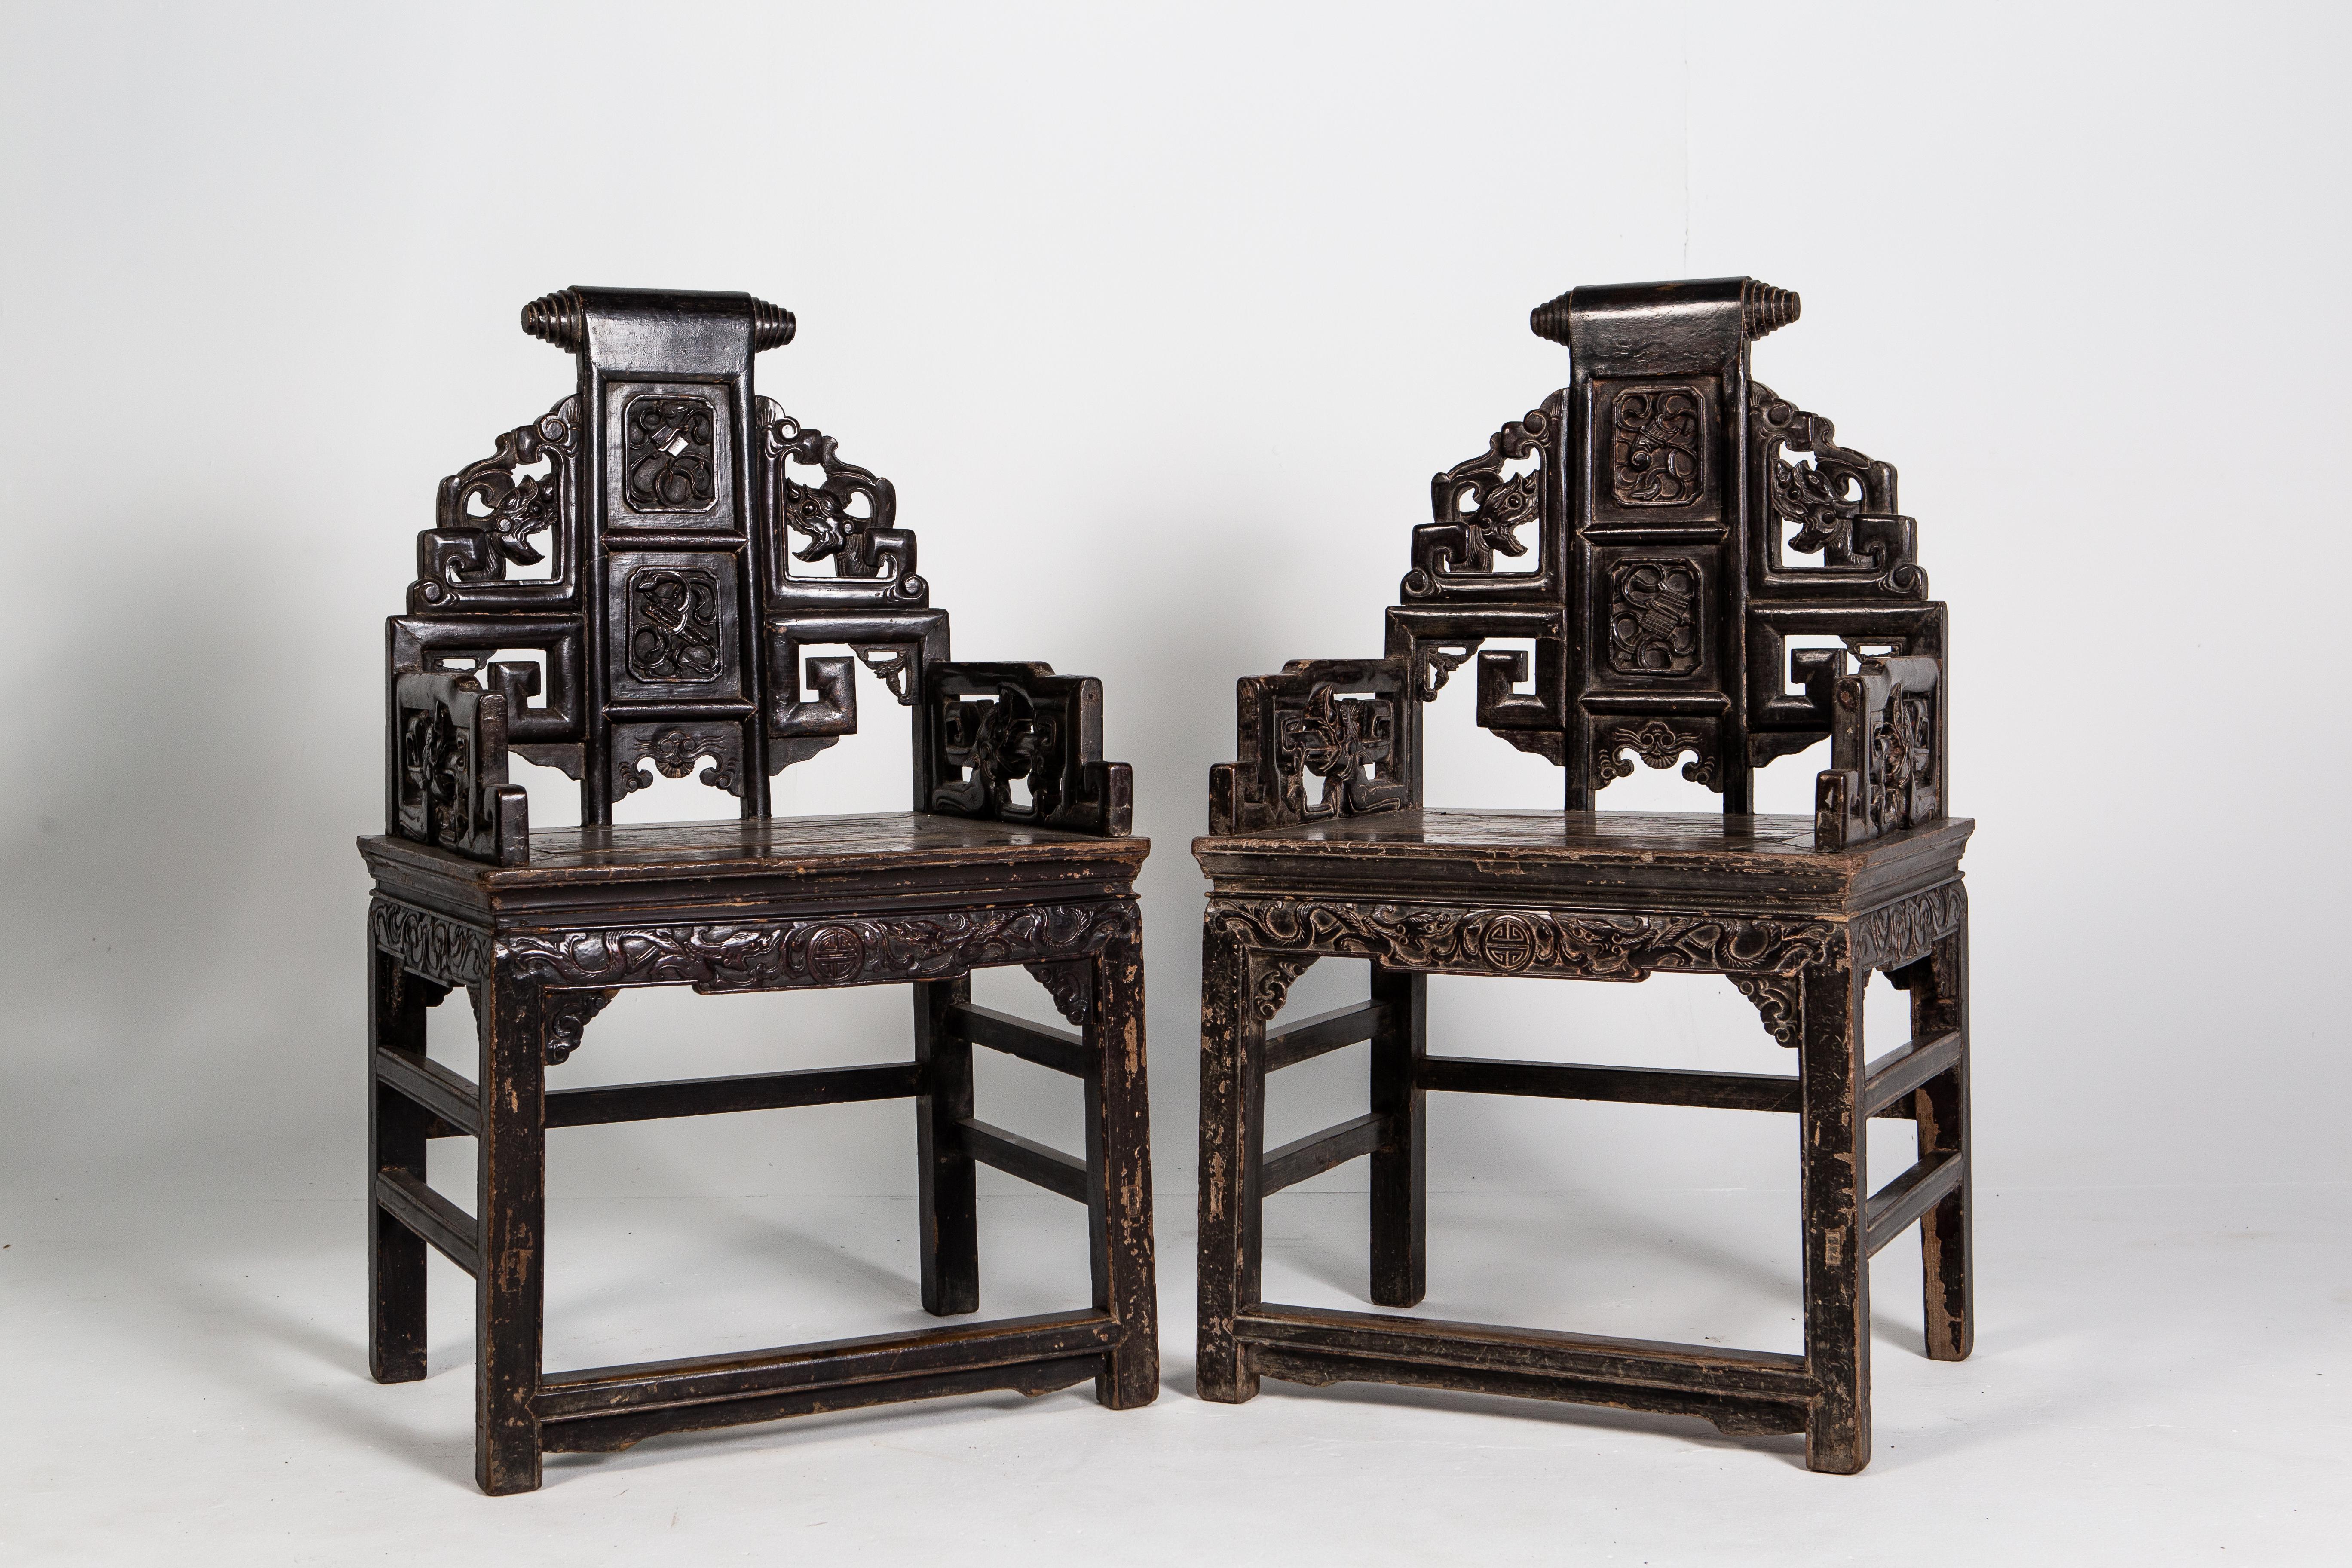 These handsome chairs feature intricate carvings depicting dragons, steeped arms and an ornate scroll on its crest rail. Made from the Qing dynasty, the chairs are made up of two parts: a waisted stool and an upper backrest that resembles a screen